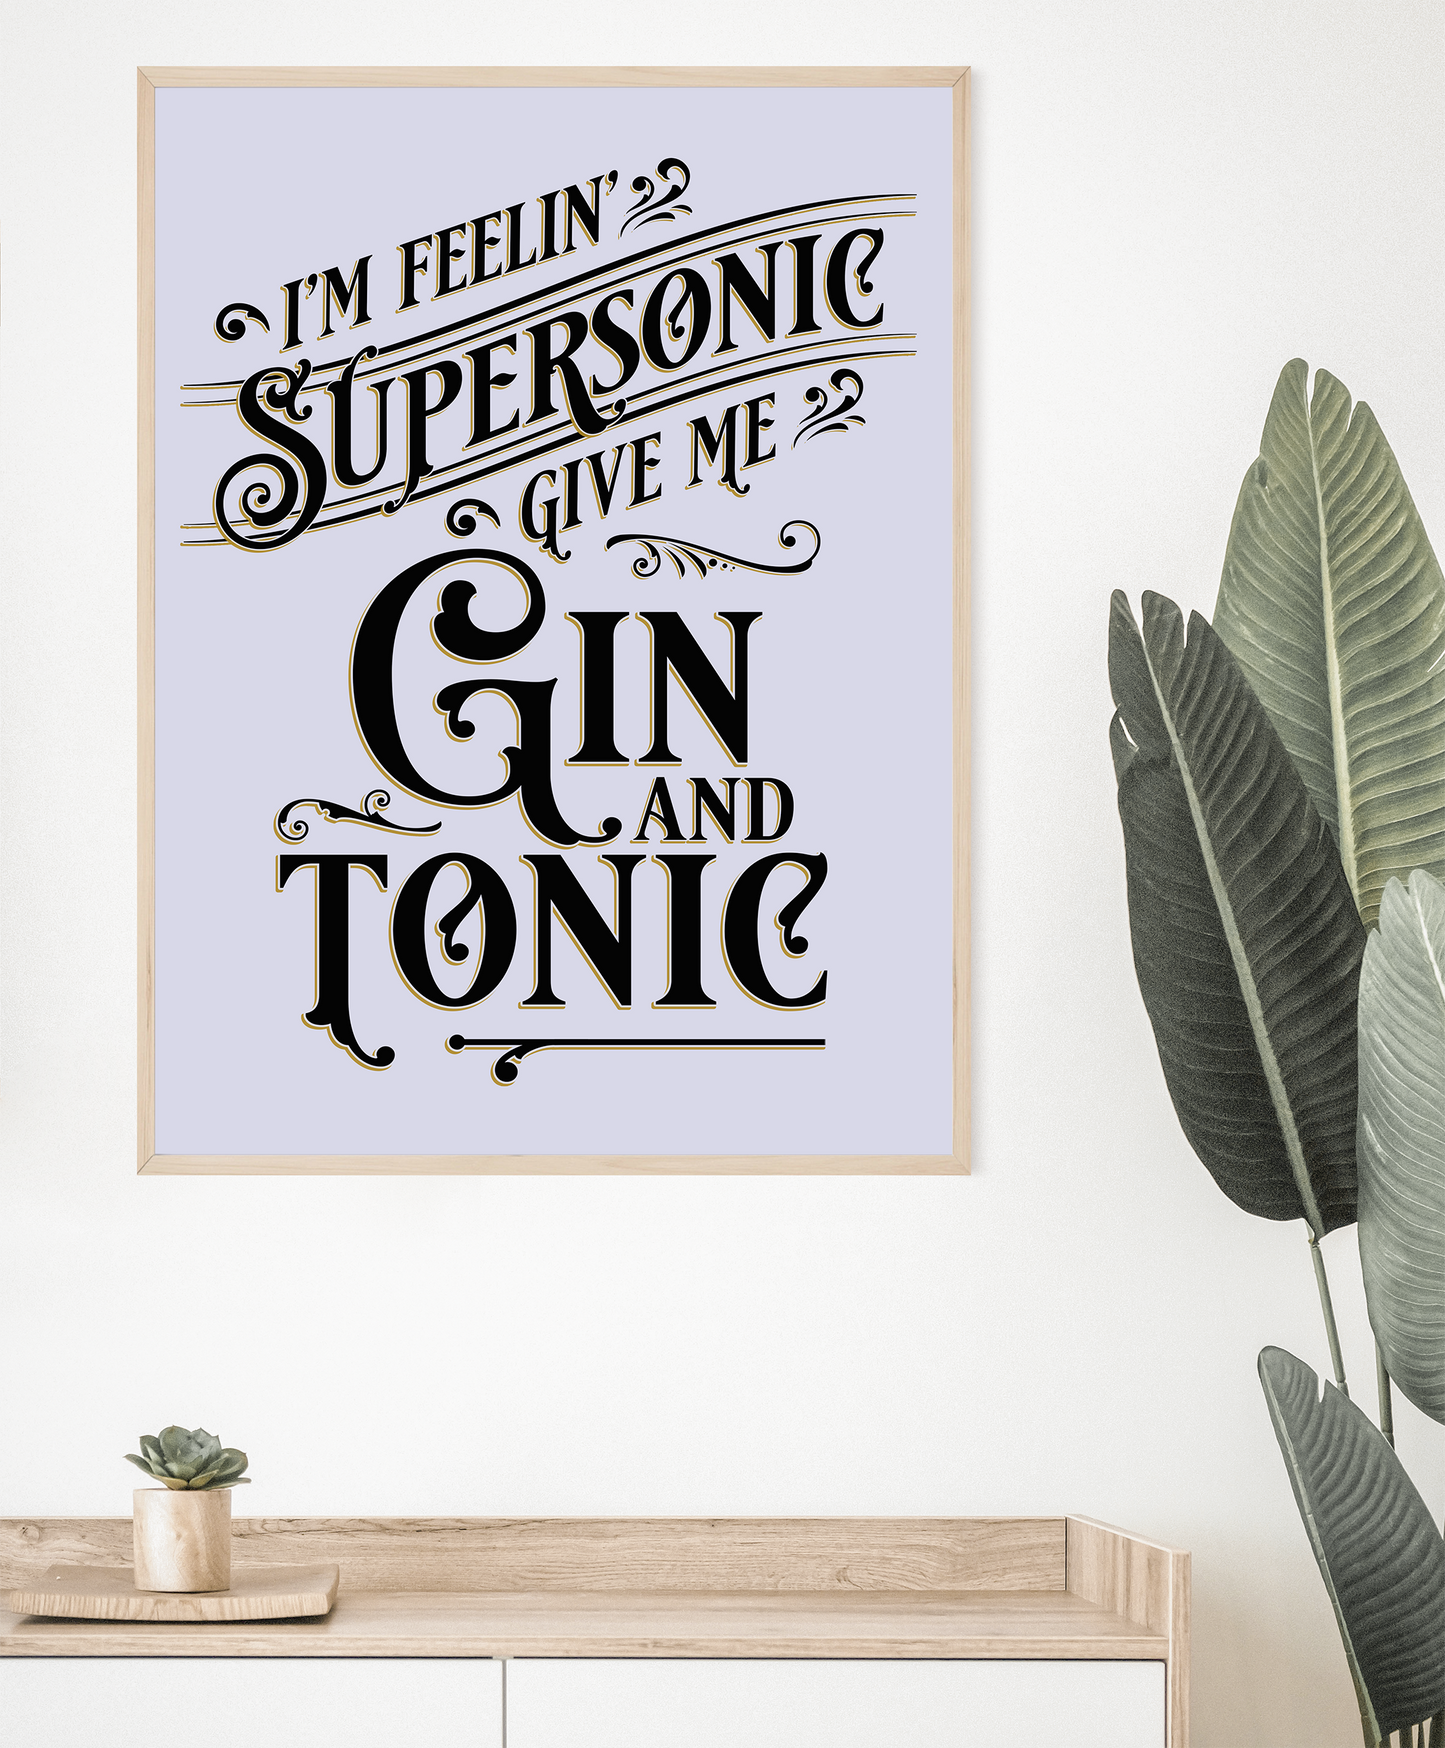 Oasis Supersonic Gin and Tonic Wall Art Poster Print framed on wall